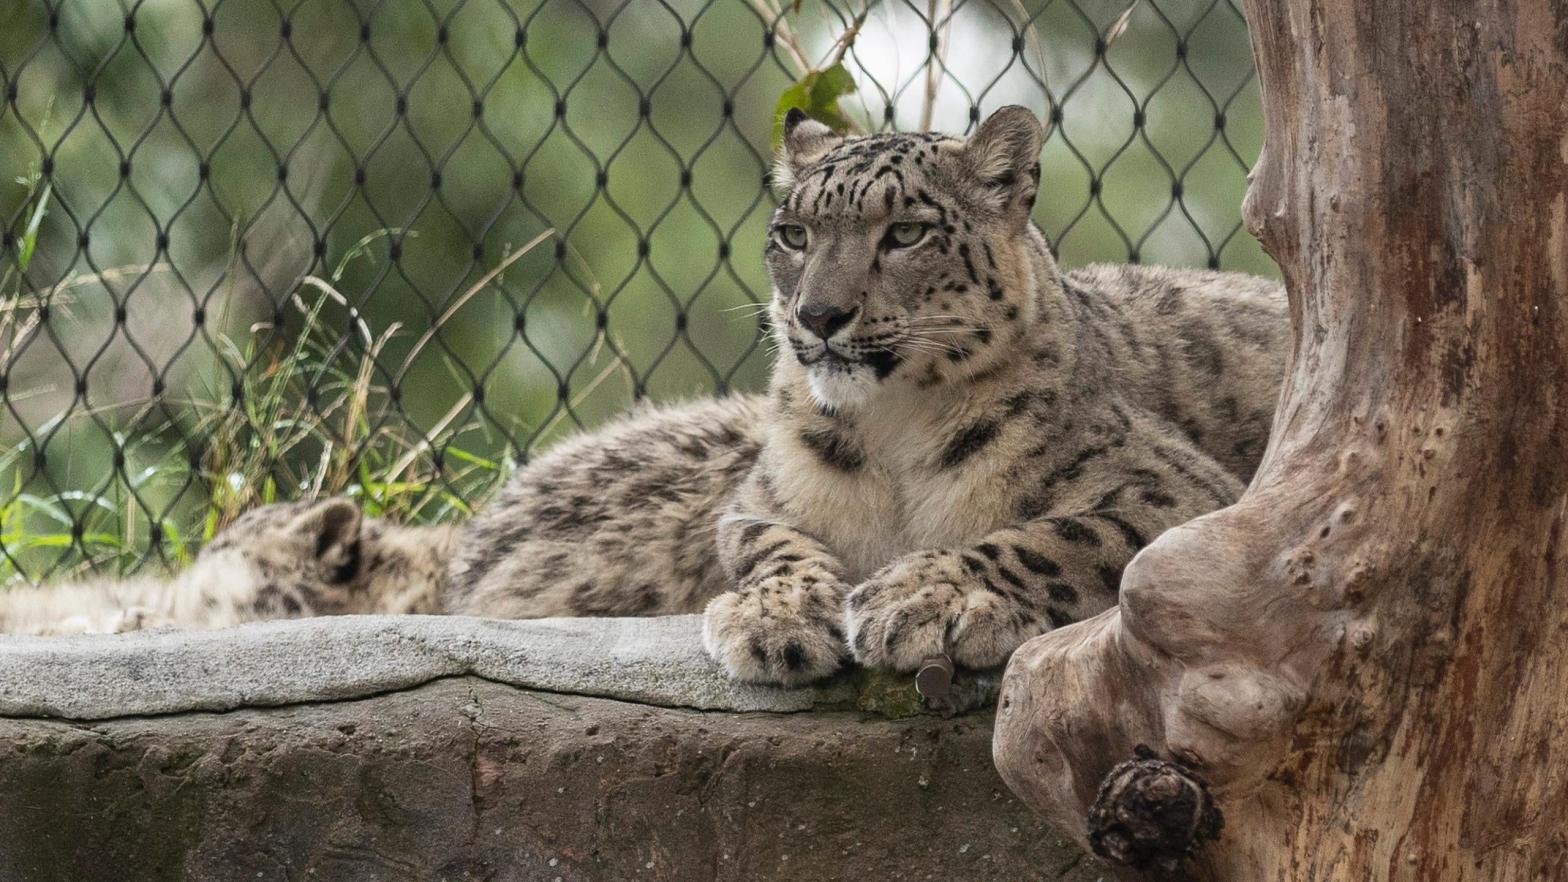 Snow leopards seen at the Melbourne Zoo on June 01, 2020 in Melbourne, Australia. (Photo: Daniel Pockett, Getty Images)